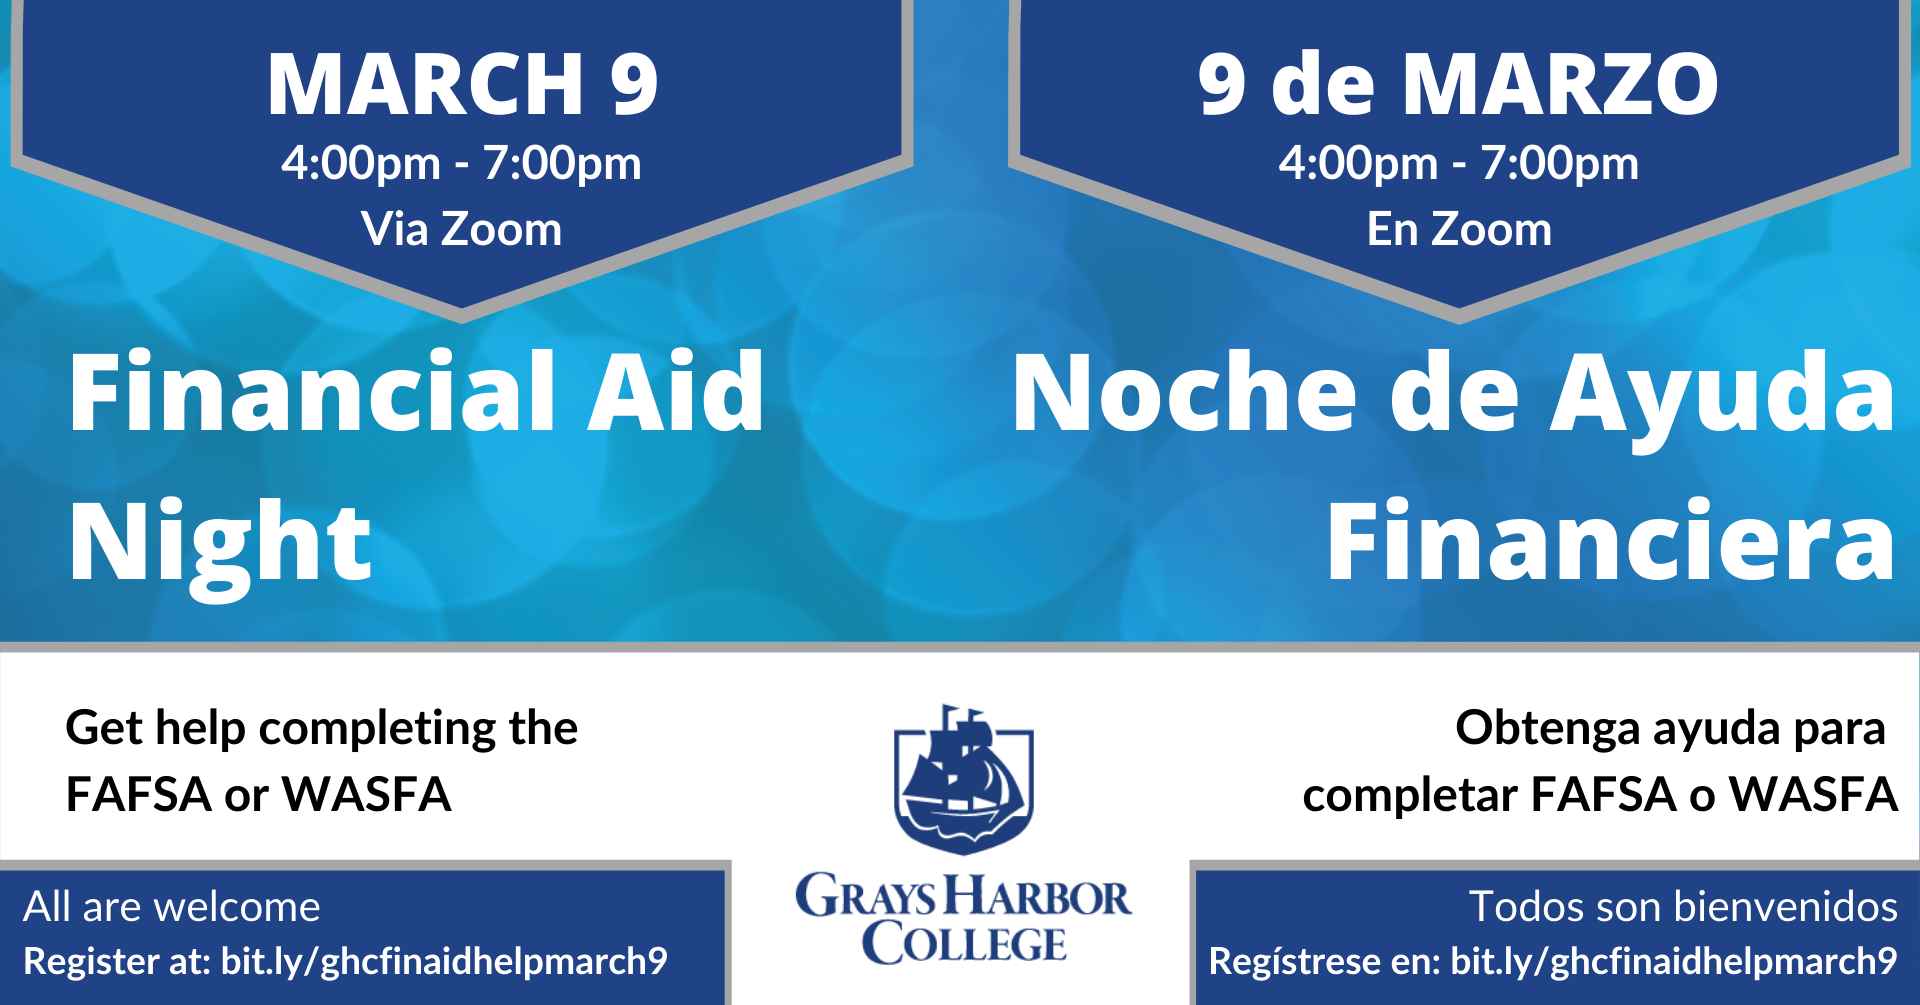 March 9 4:00pm - 7:00pm via Zoom. Get help completing the FAFSA or WASFA. All are welcome